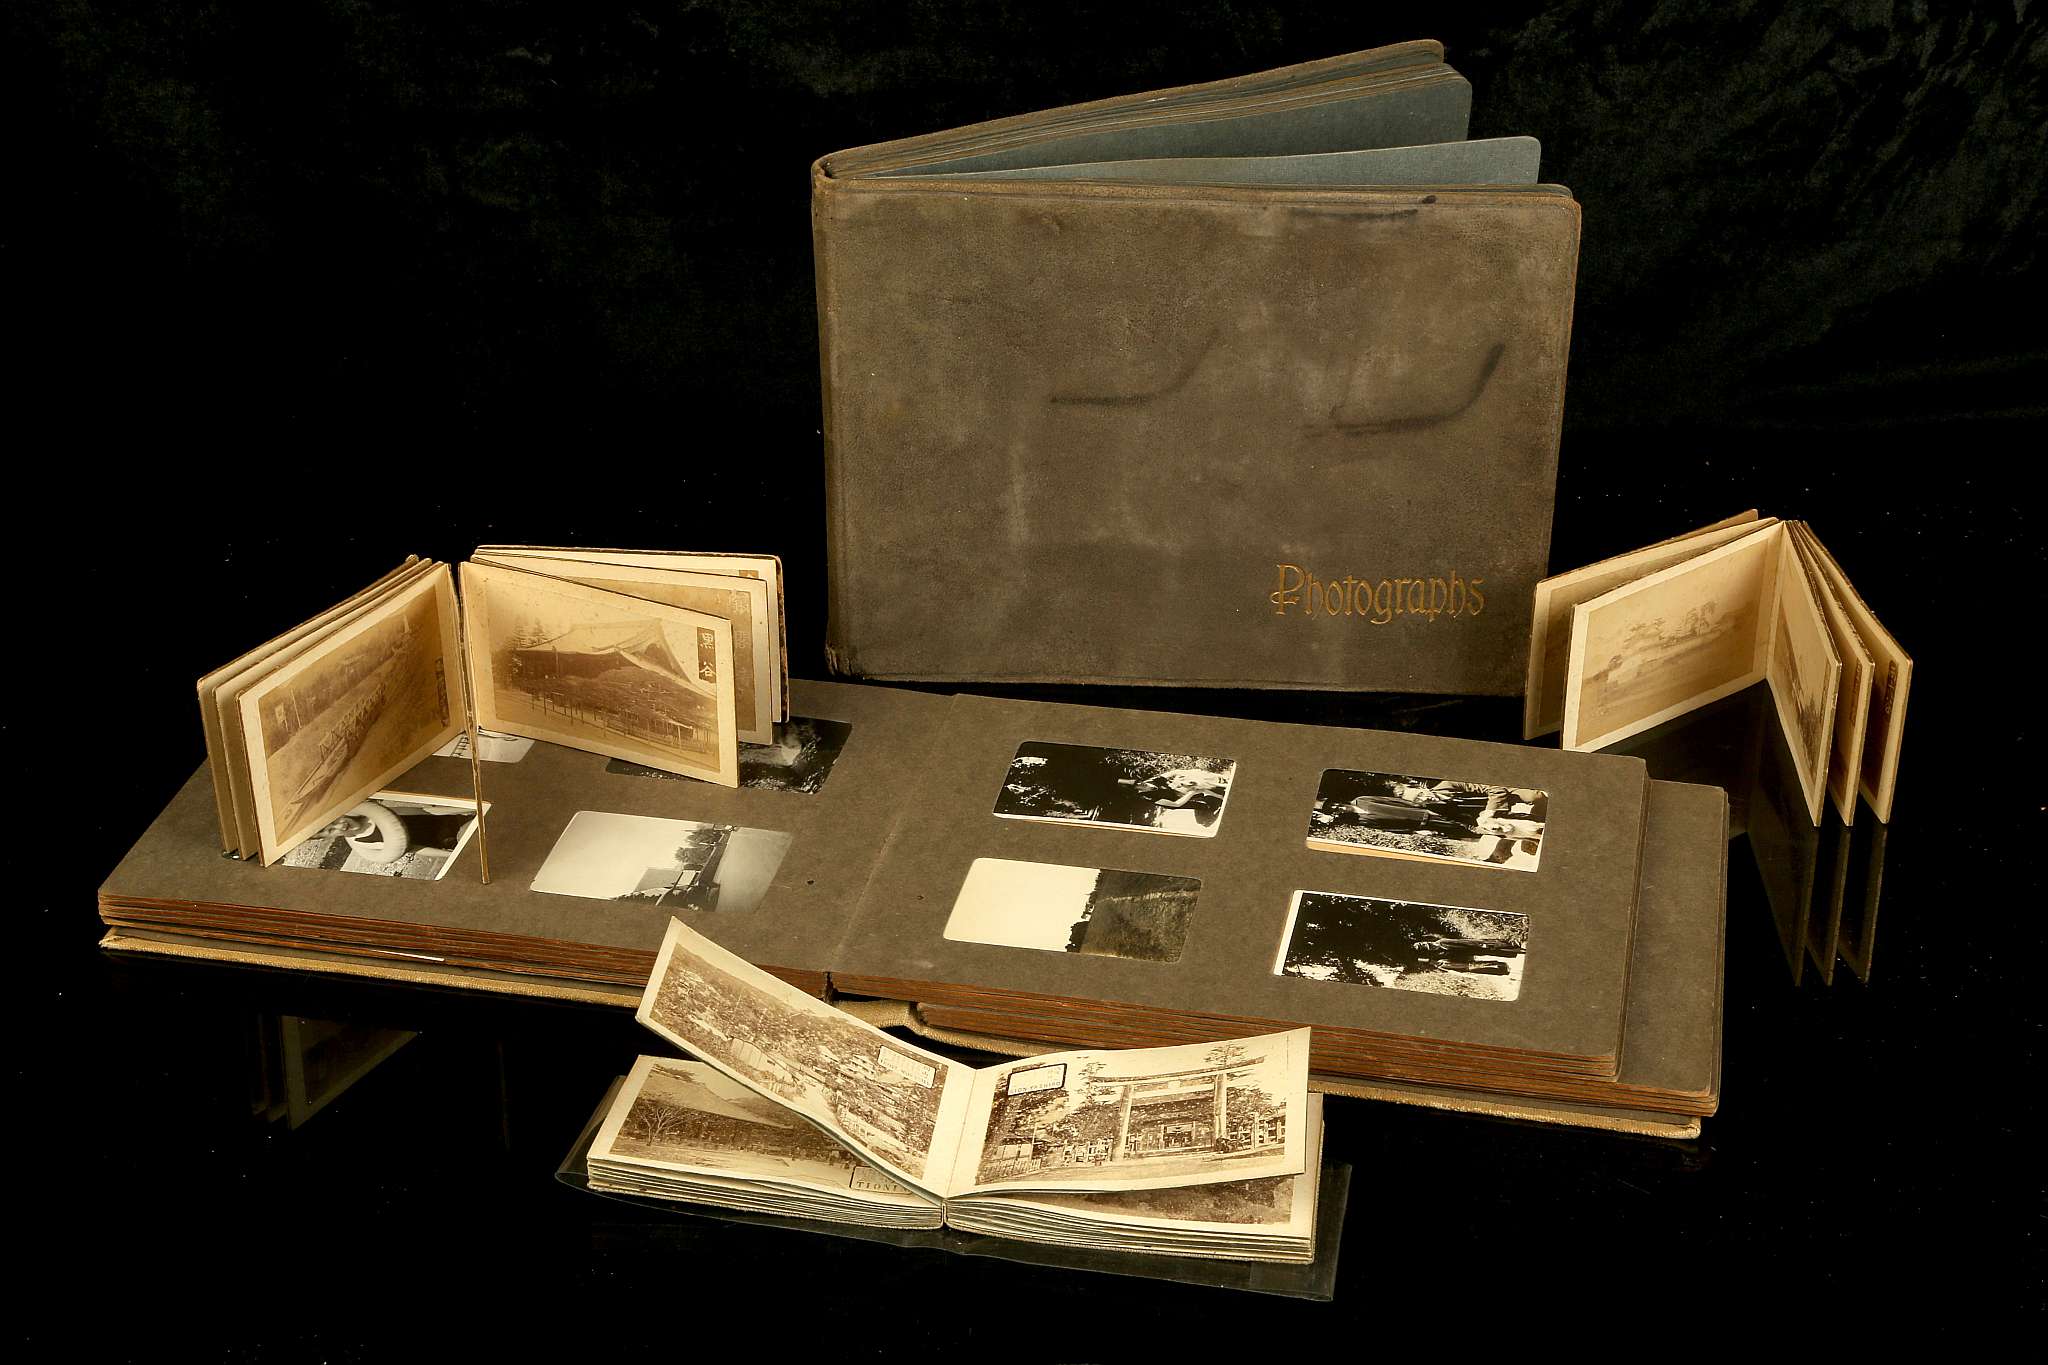 PHOTOGRAPHS - 4 albums. c. 1920-30, including some of naval interest and some relating to Italy